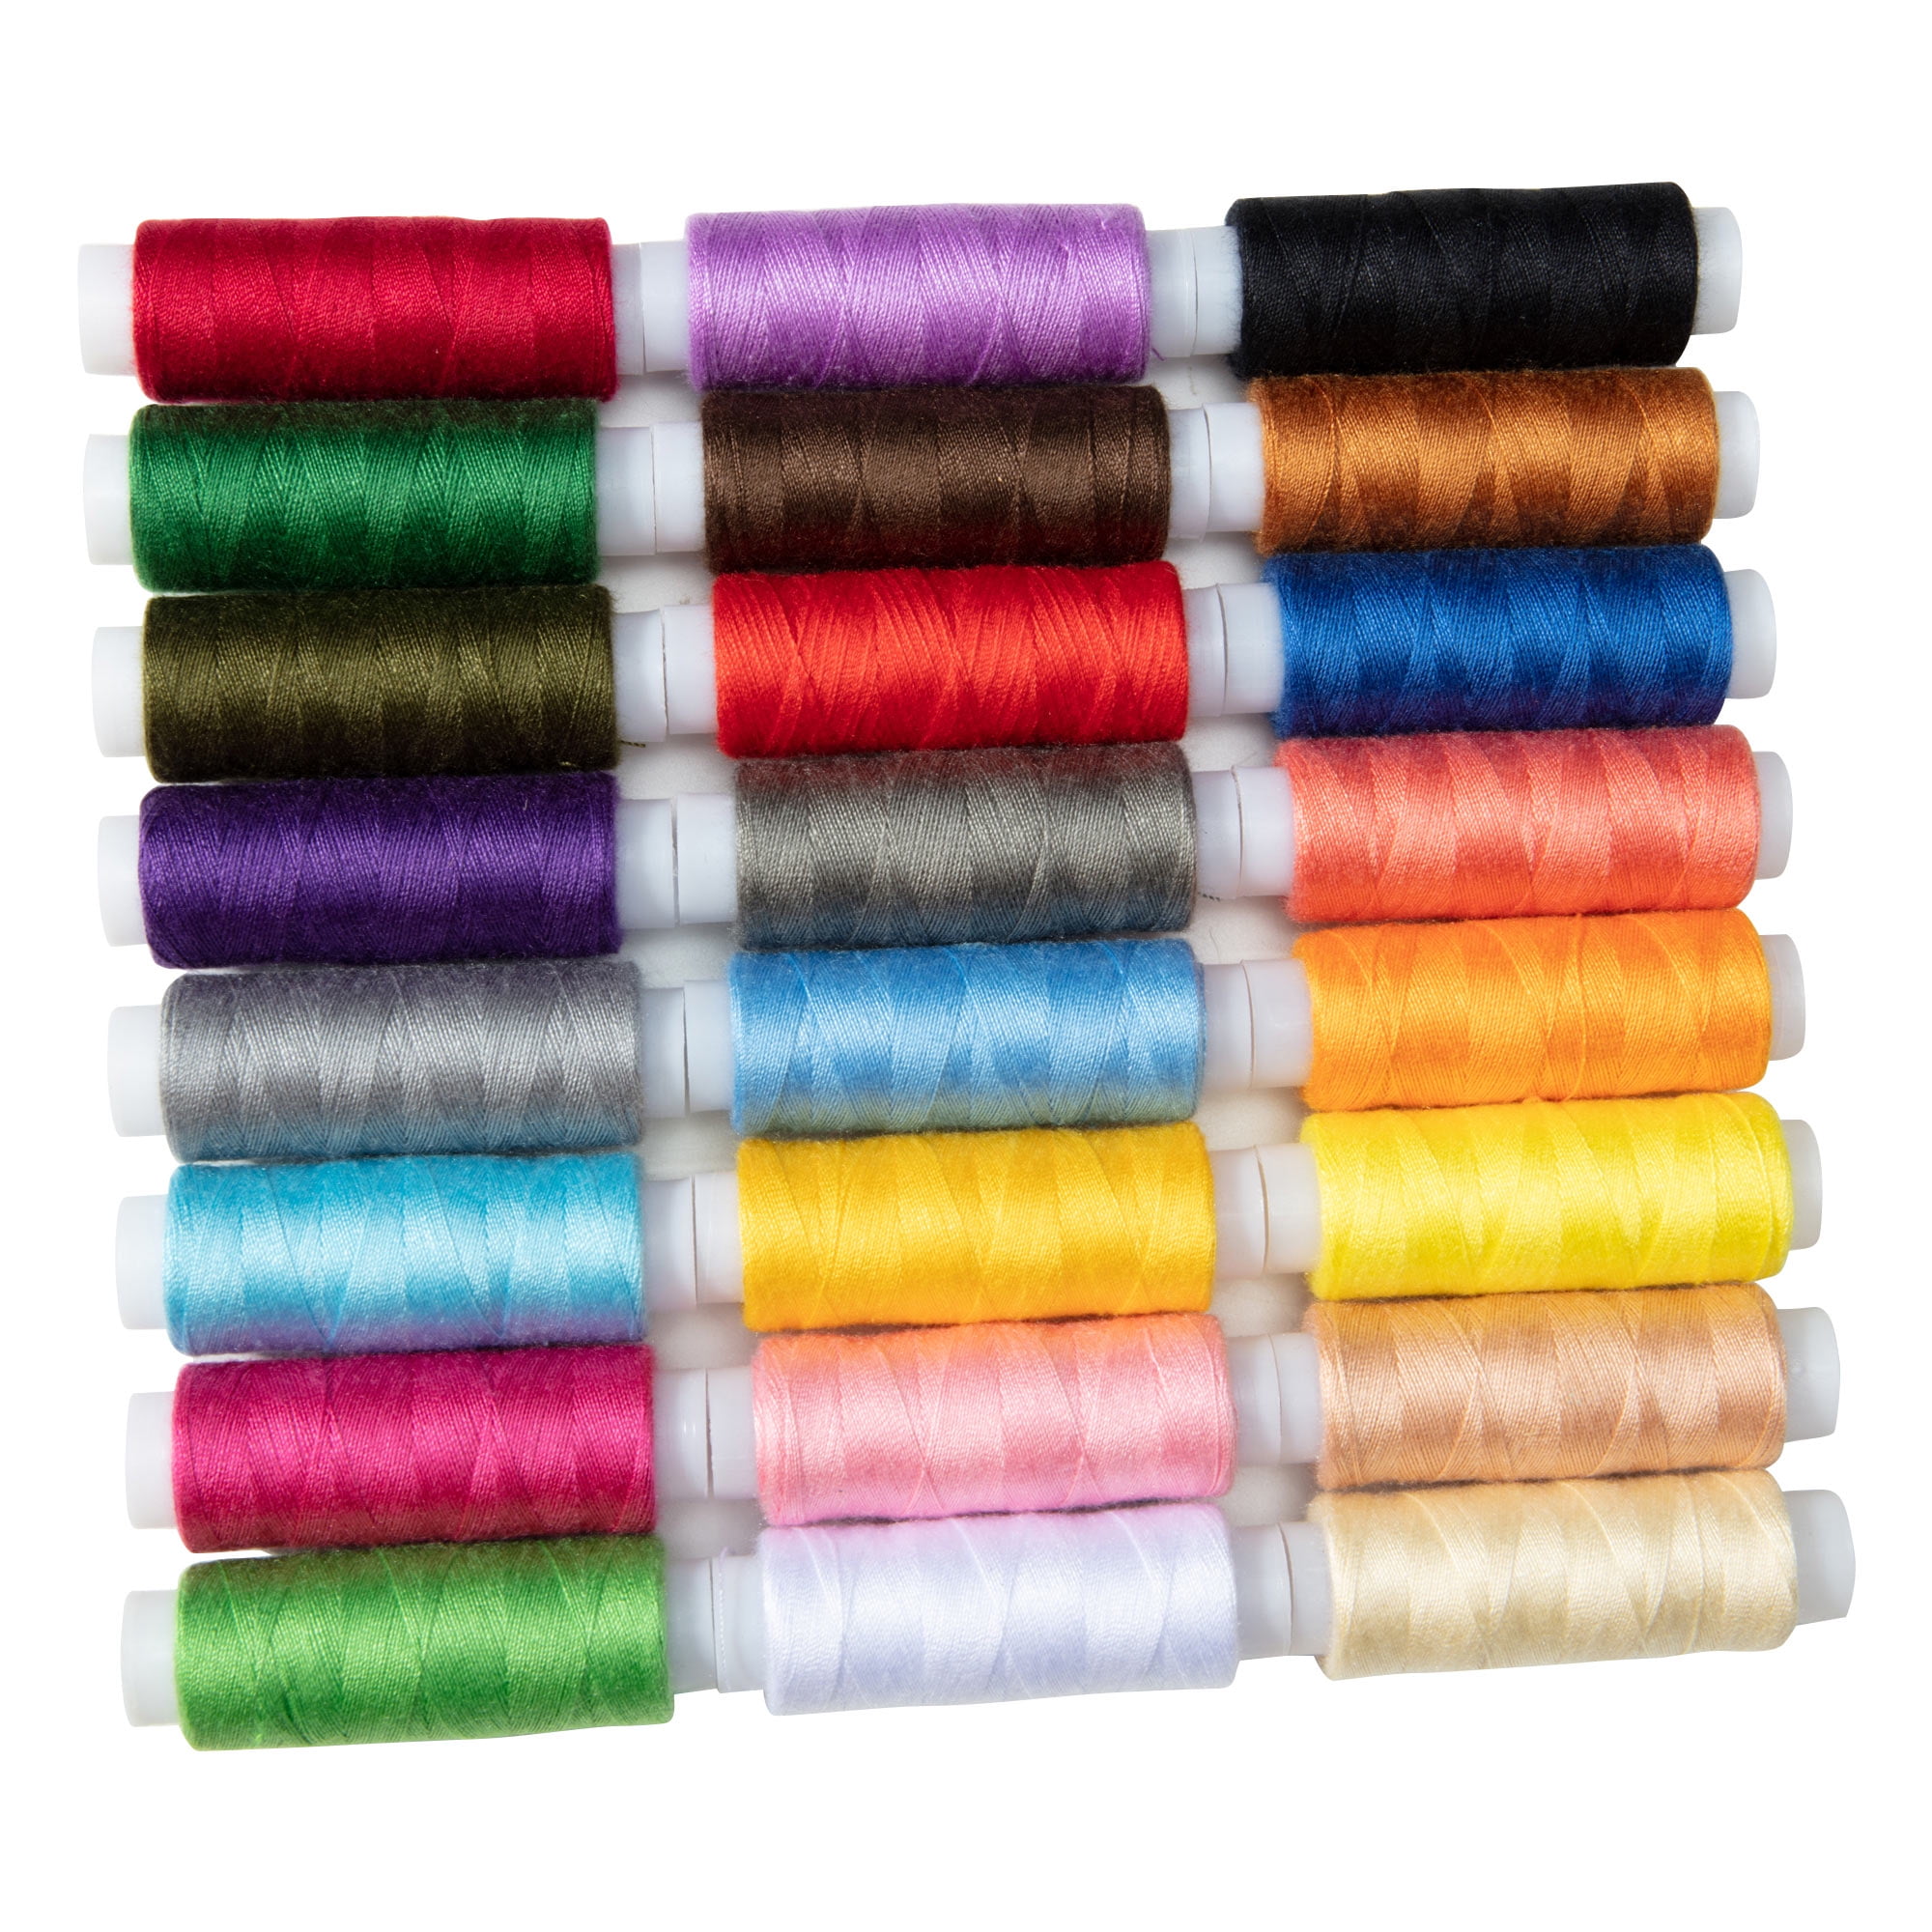 Sewing Thread Kit 24 Pcs Polyester Multiple Colors Hand Sewing Set Household Multi-Functional for Sewing Machines Handmade Crafts Embroidery 